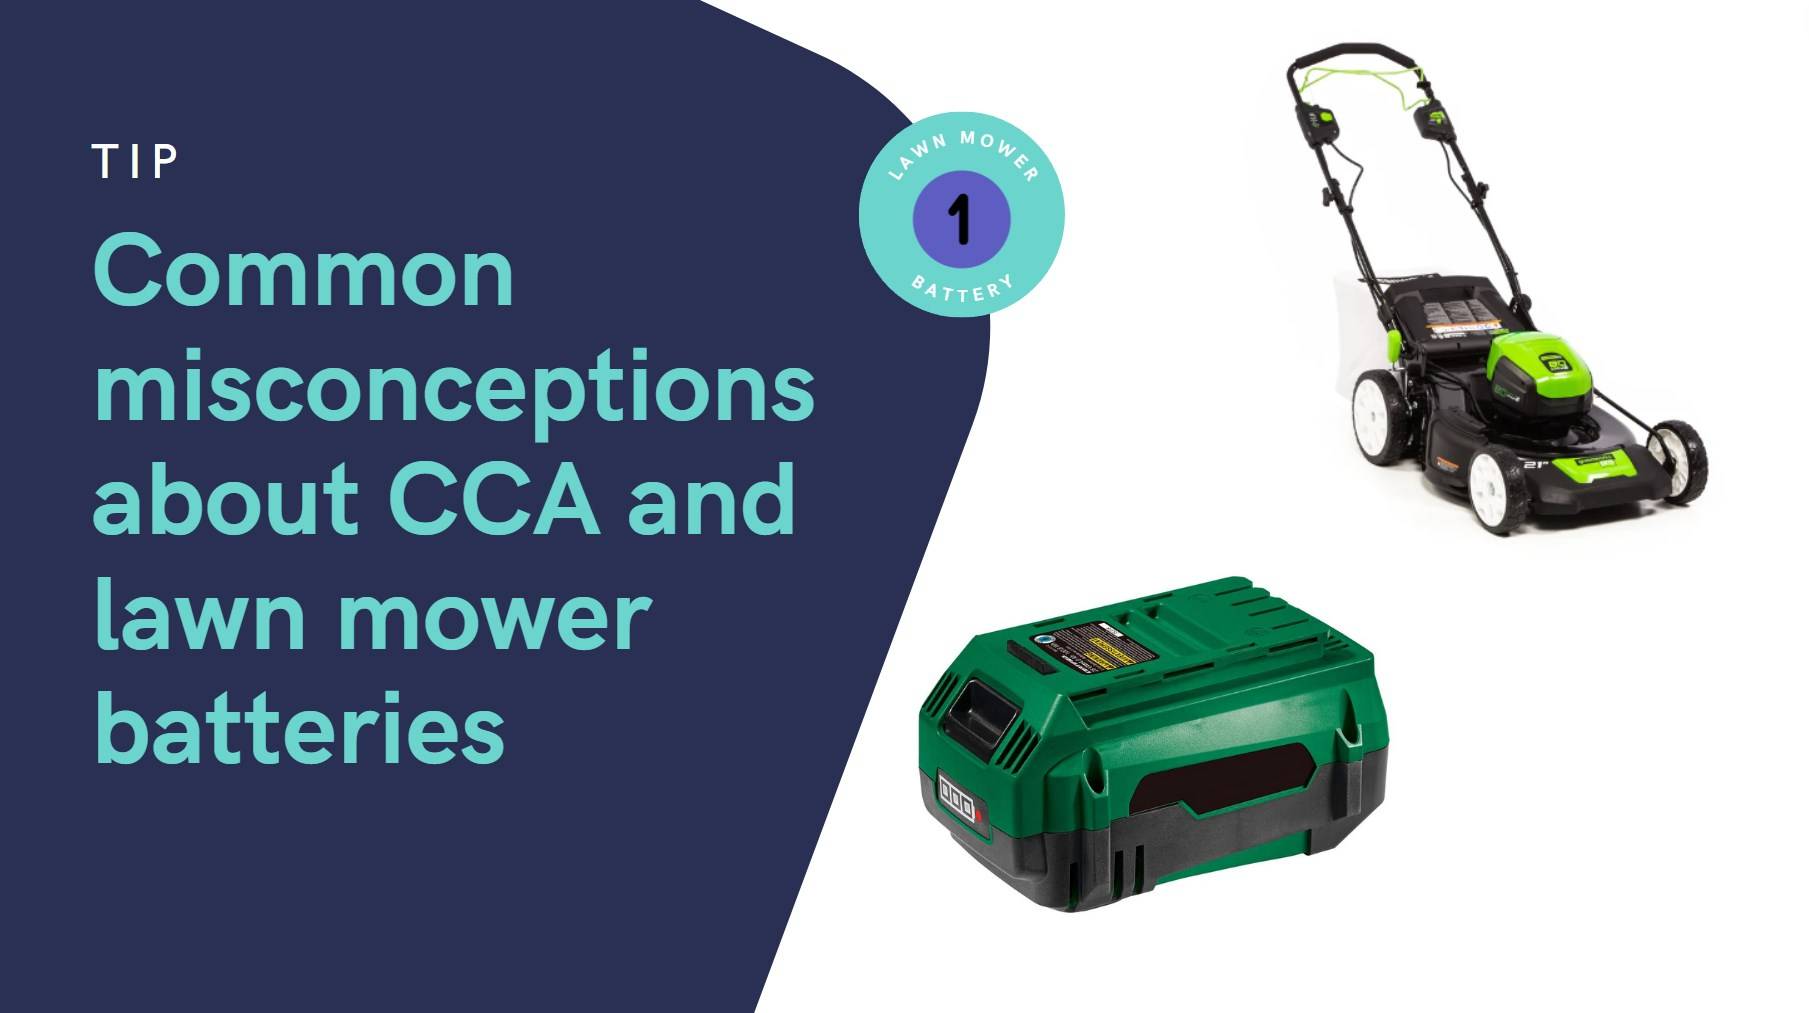 Common misconceptions about CCA and lawn mower batteries